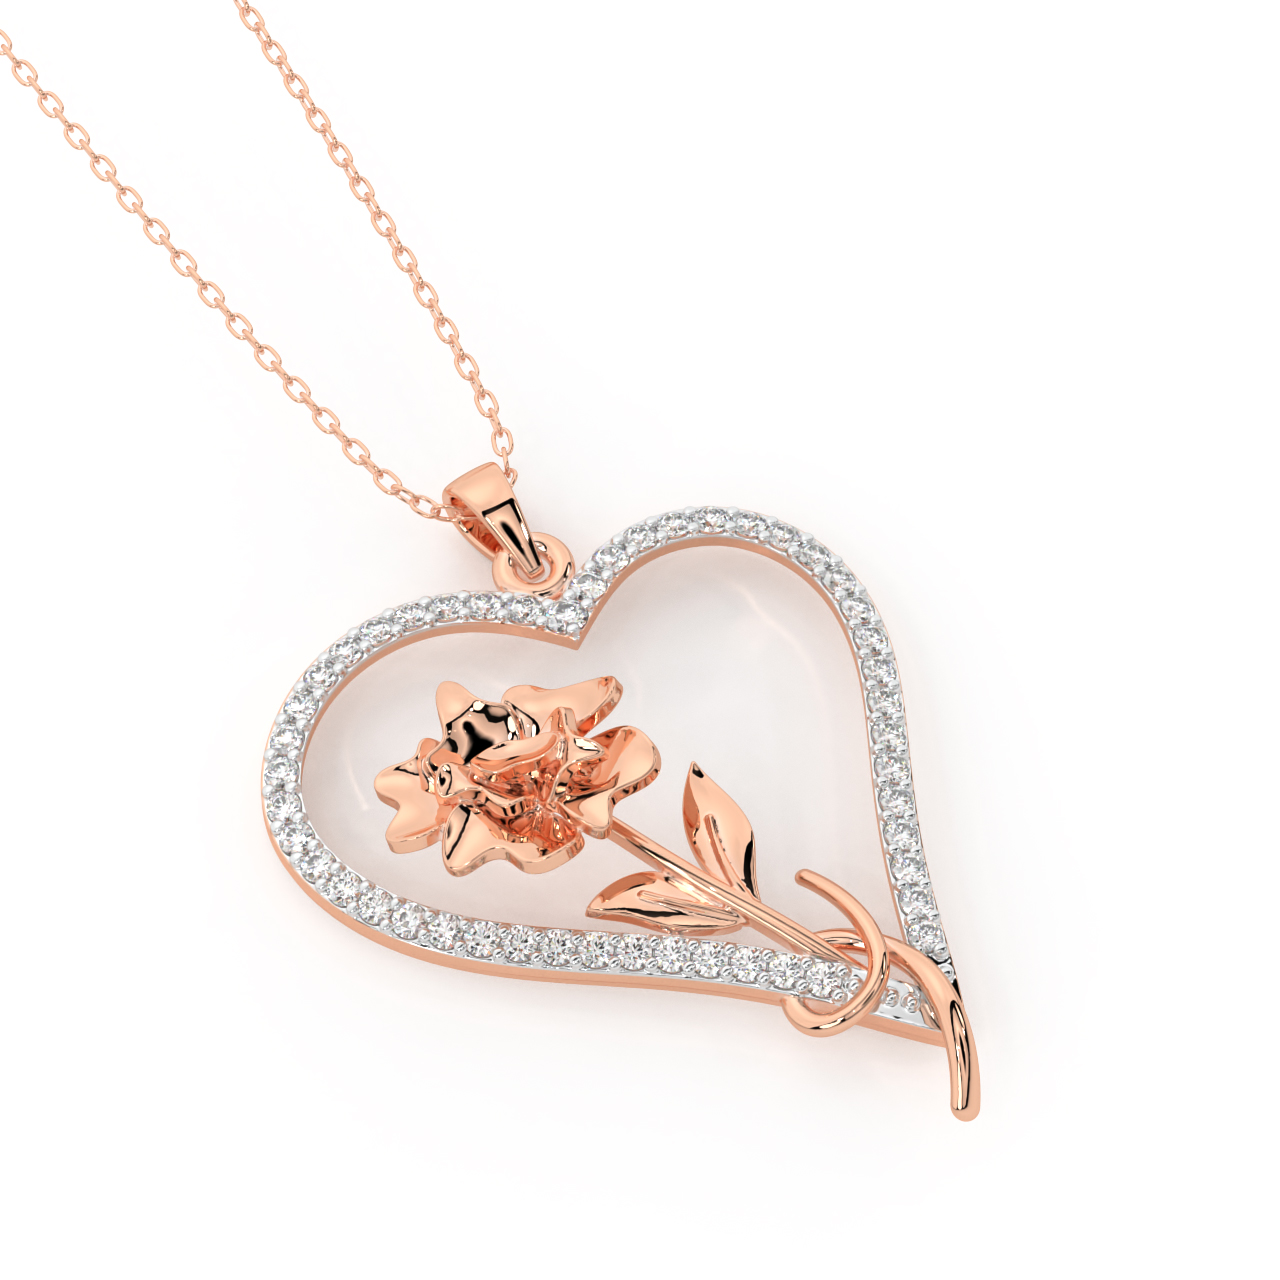 The Rose in Heart Shaped Pendant